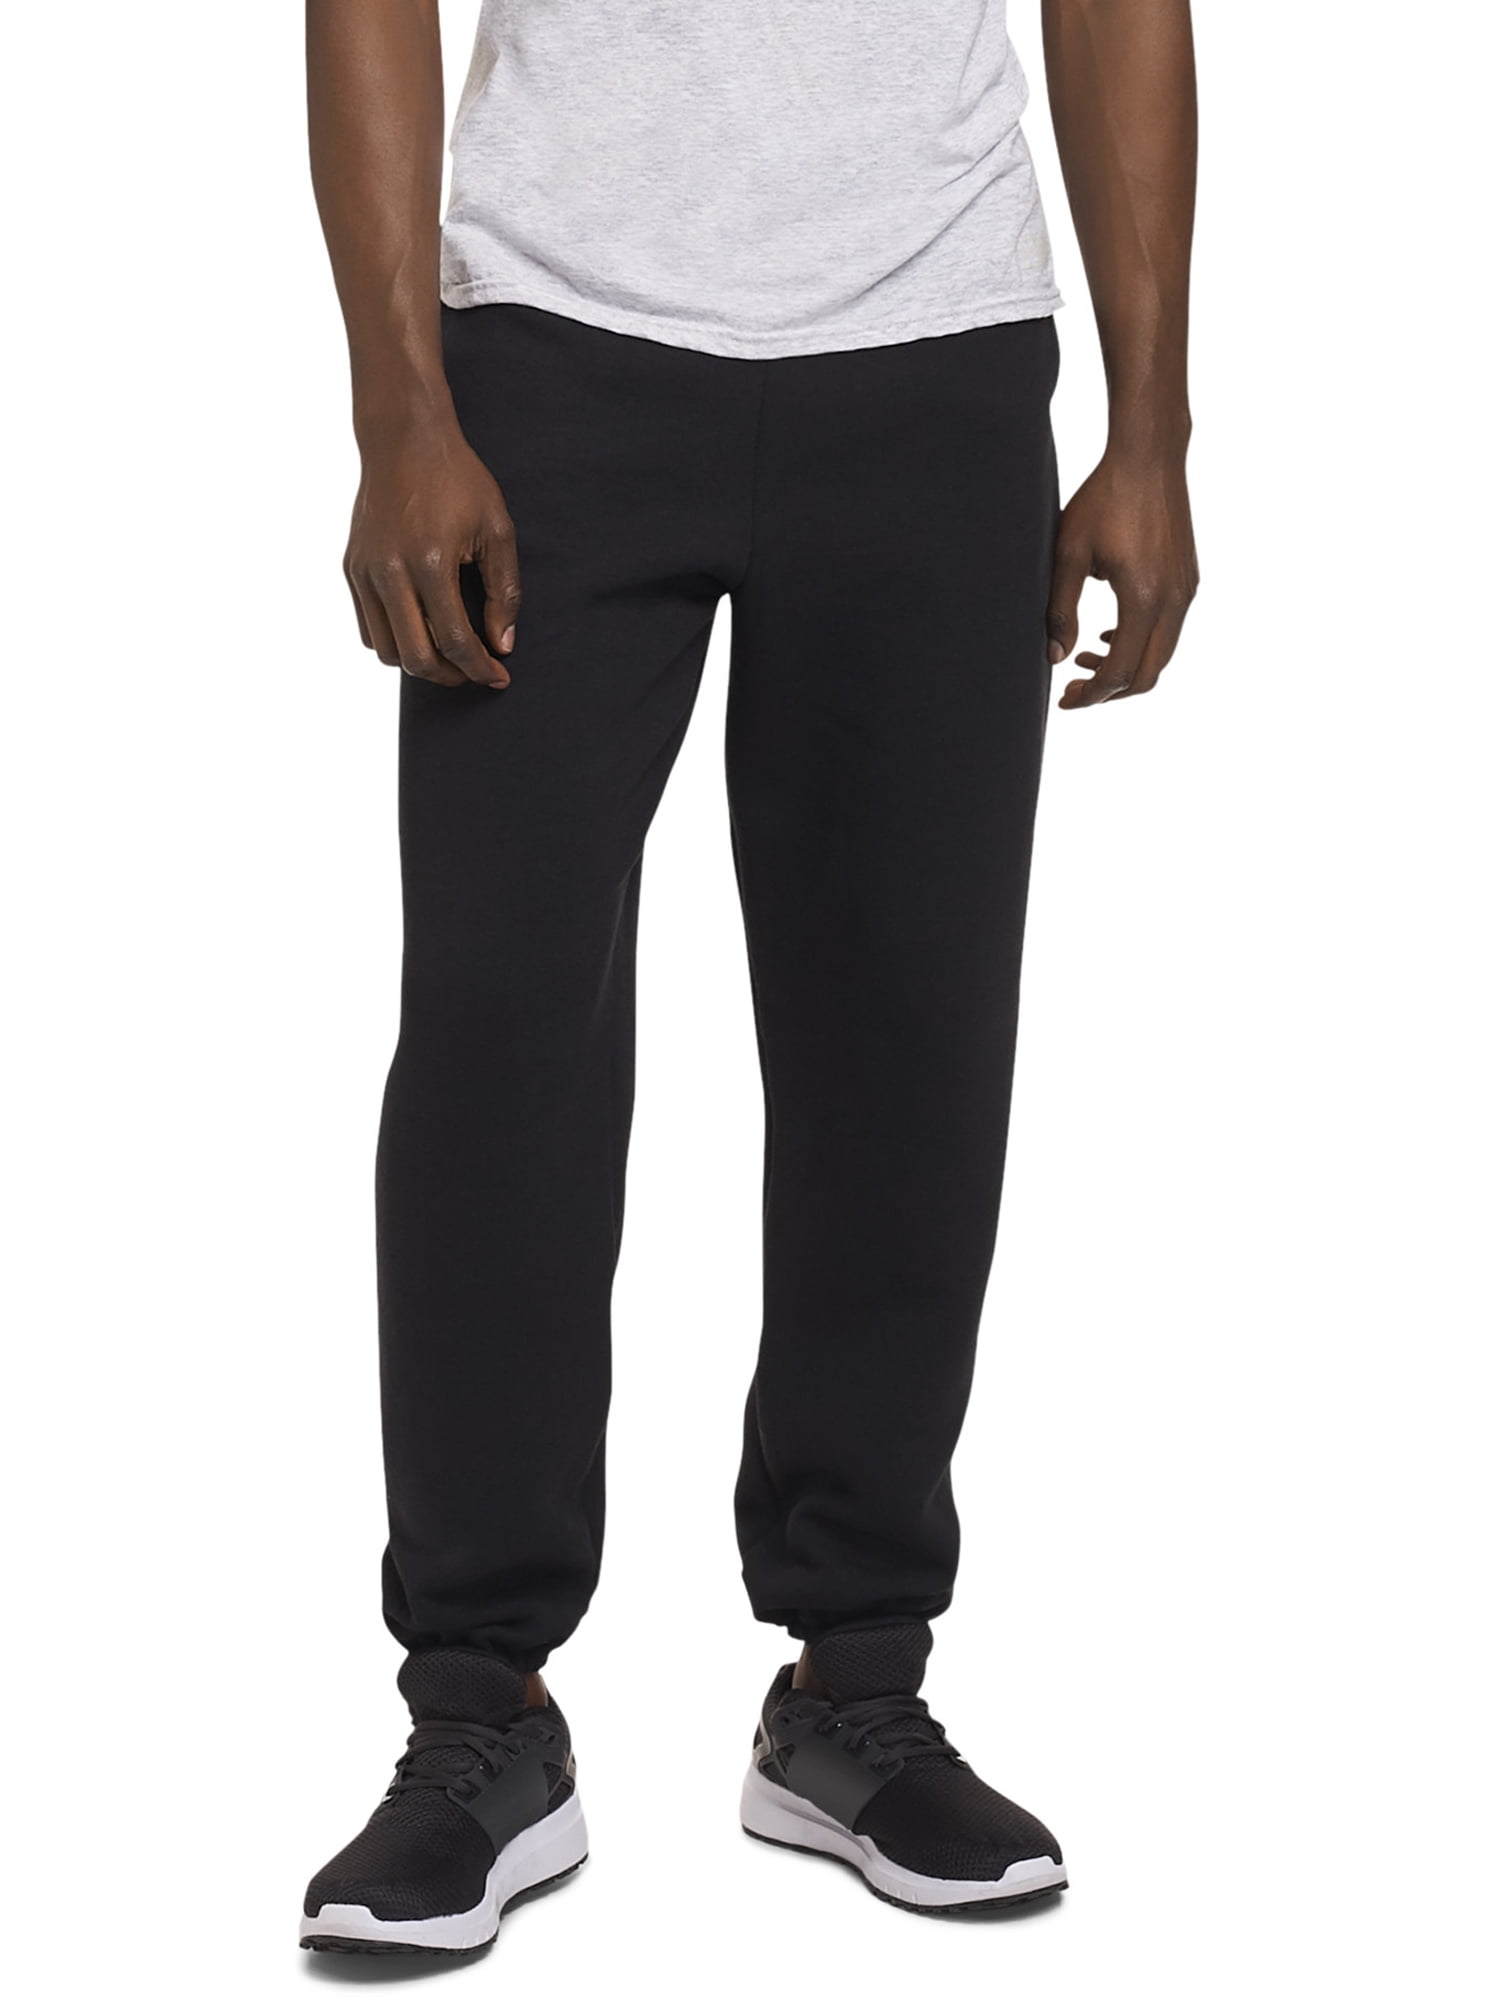 Russell  Youth No Pocket NuBlend DriPower Elastic Bottom Sweatpants